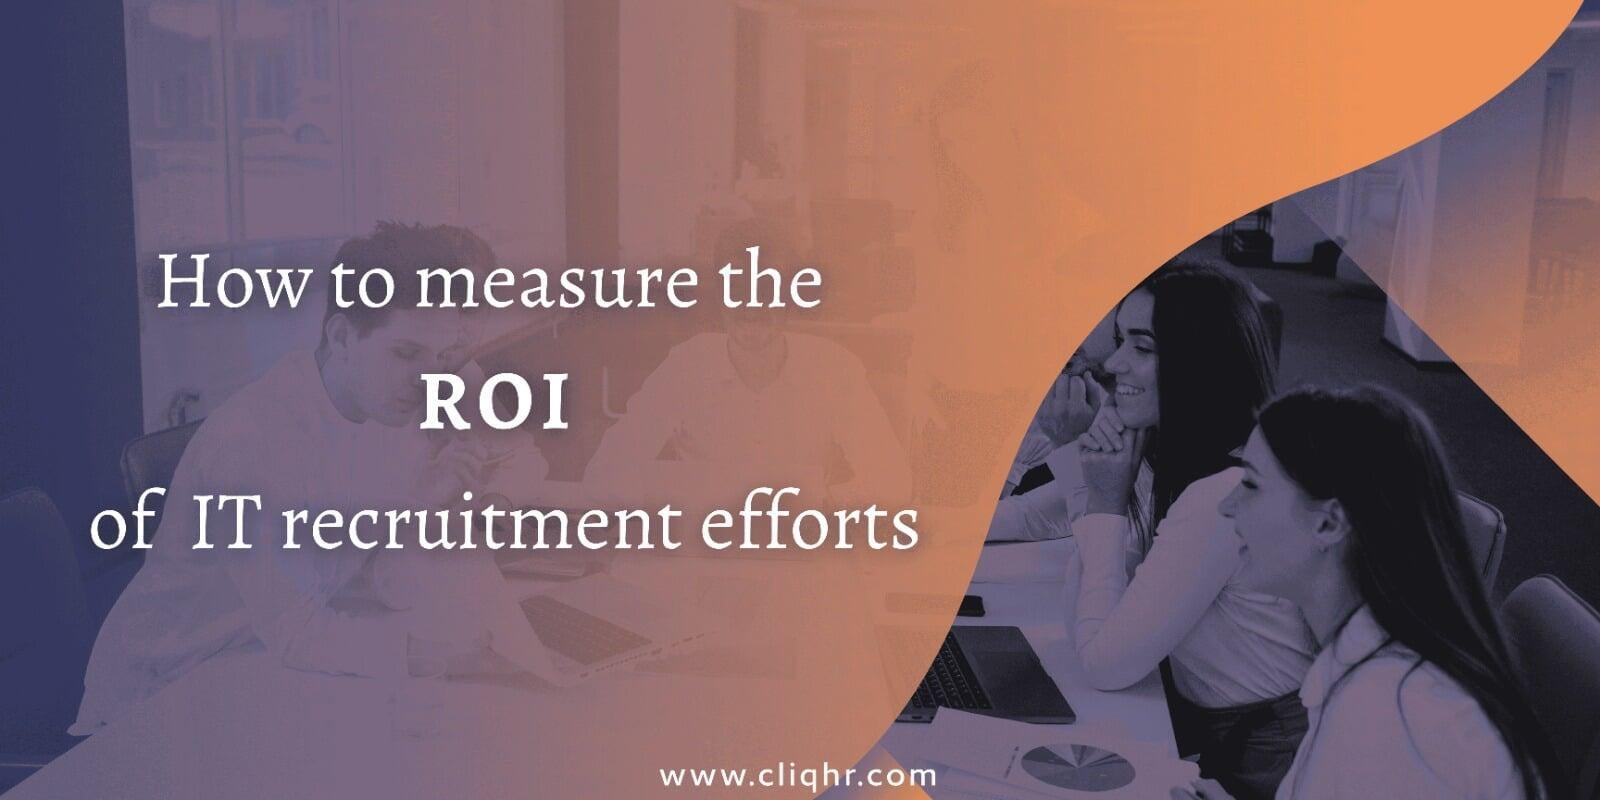 How to measure the ROI of IT recruitment efforts?